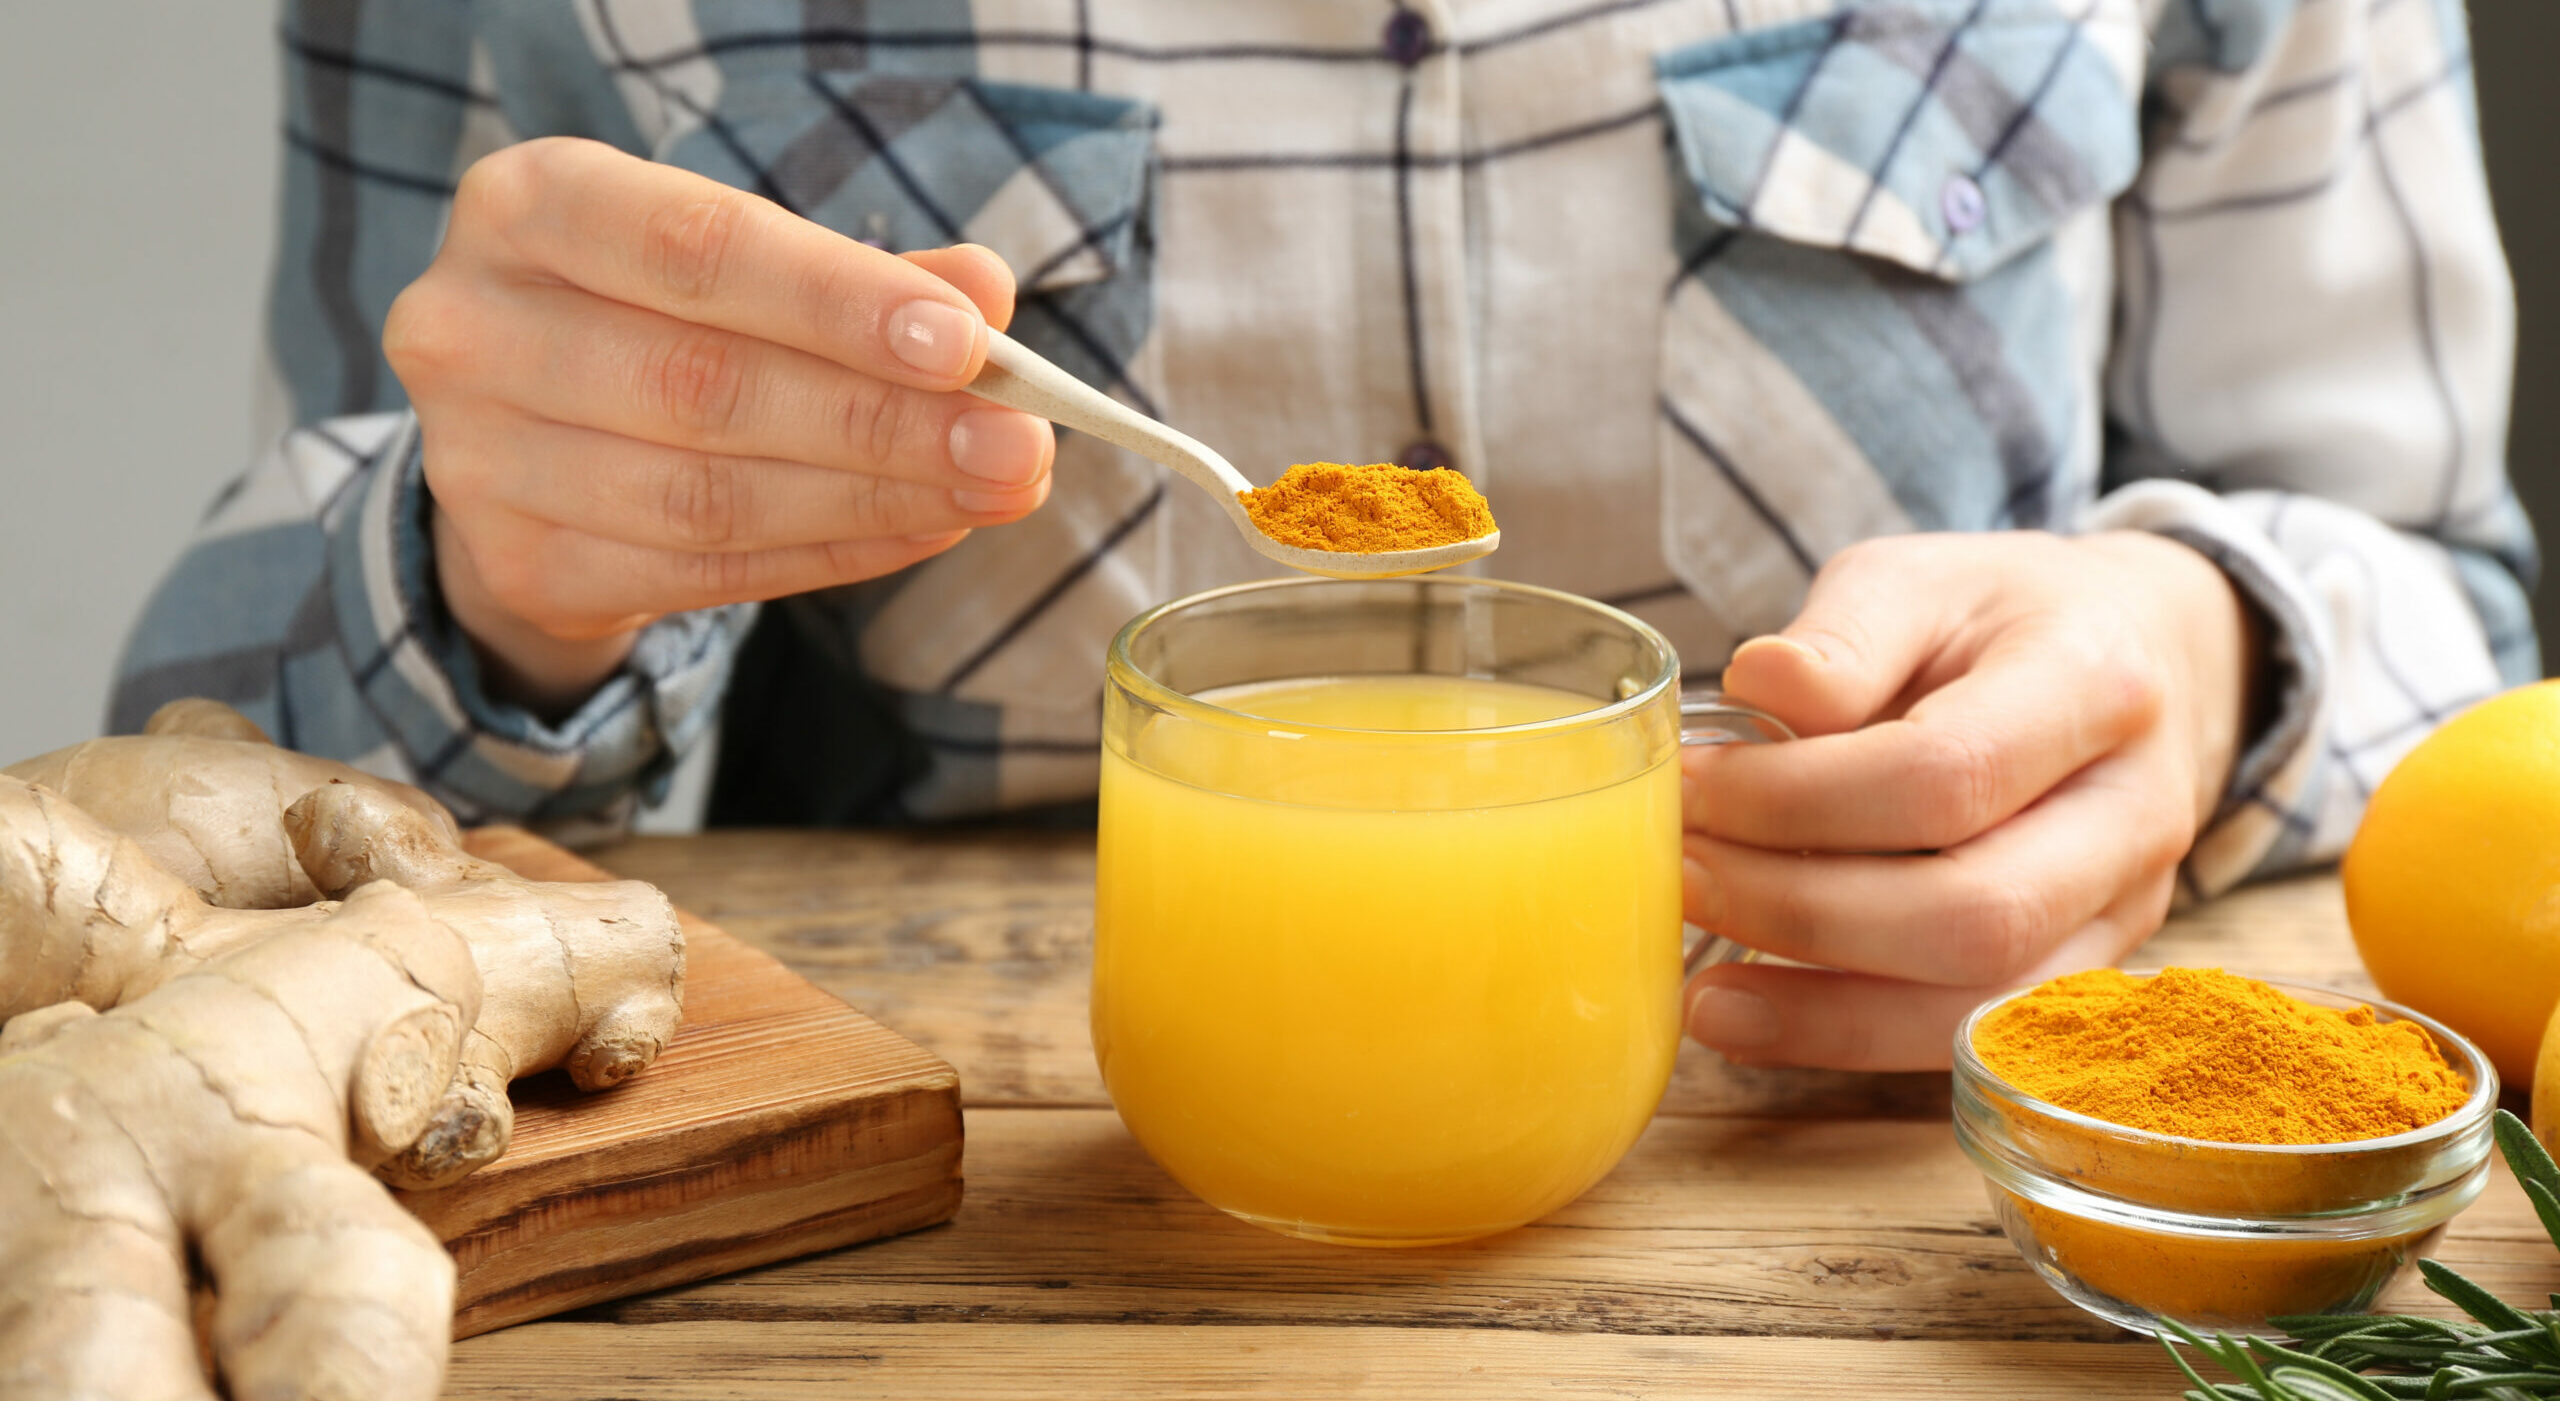 Woman adding turmeric to immunity boosting drink at wooden table with ingredients, closeup. Turmeric is a powerful kratom potentiator.